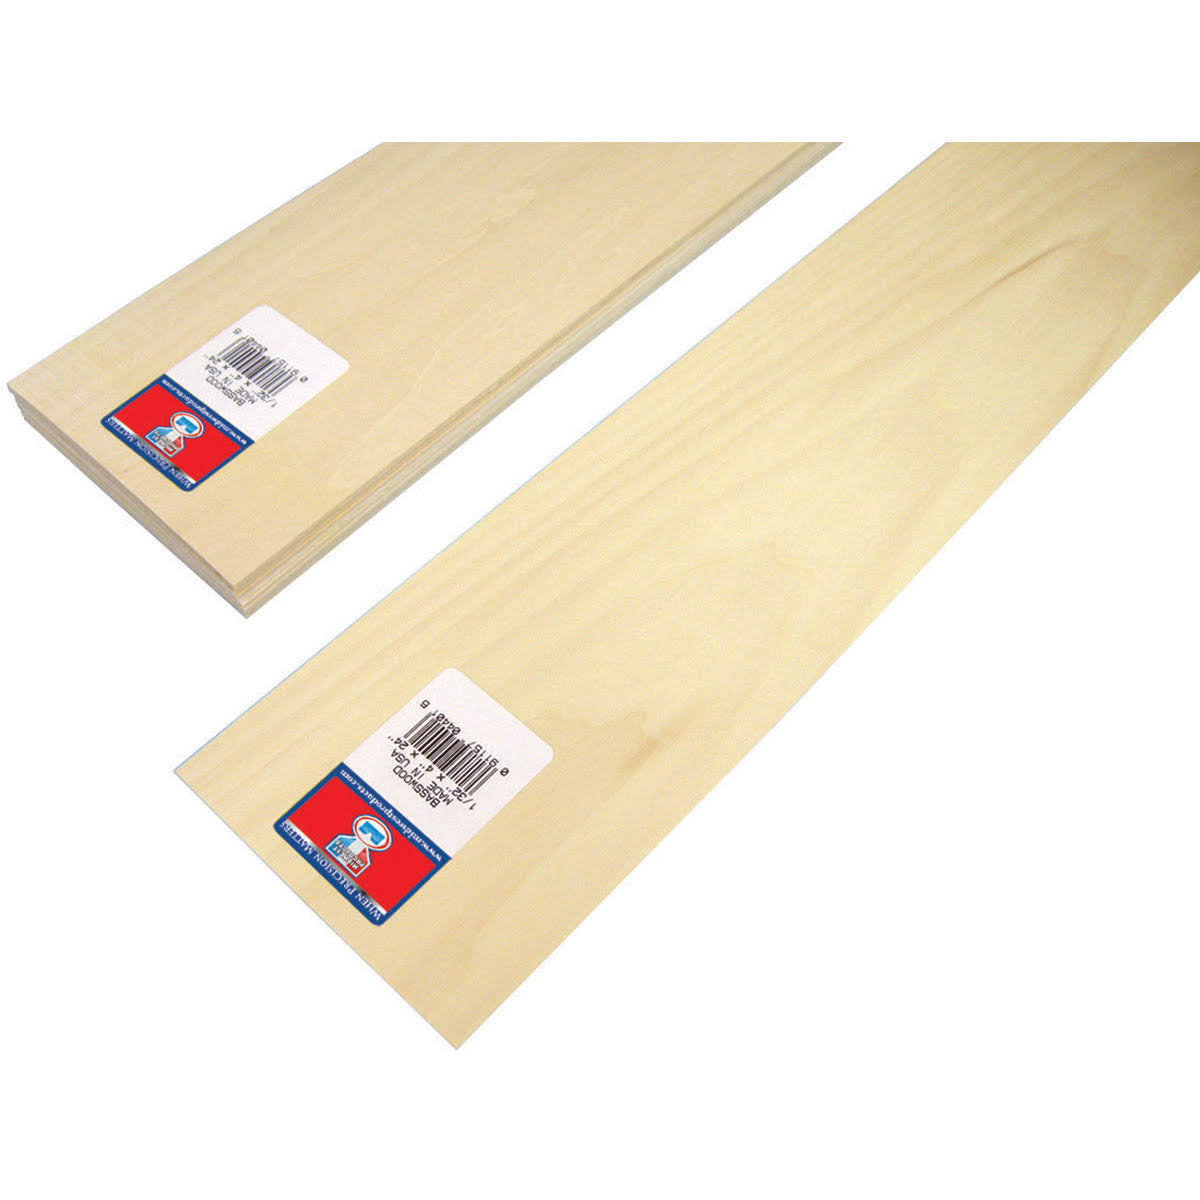 MIDWEST PRODUCTS 4401 BASSWOOD SHEET 1/32X4X24